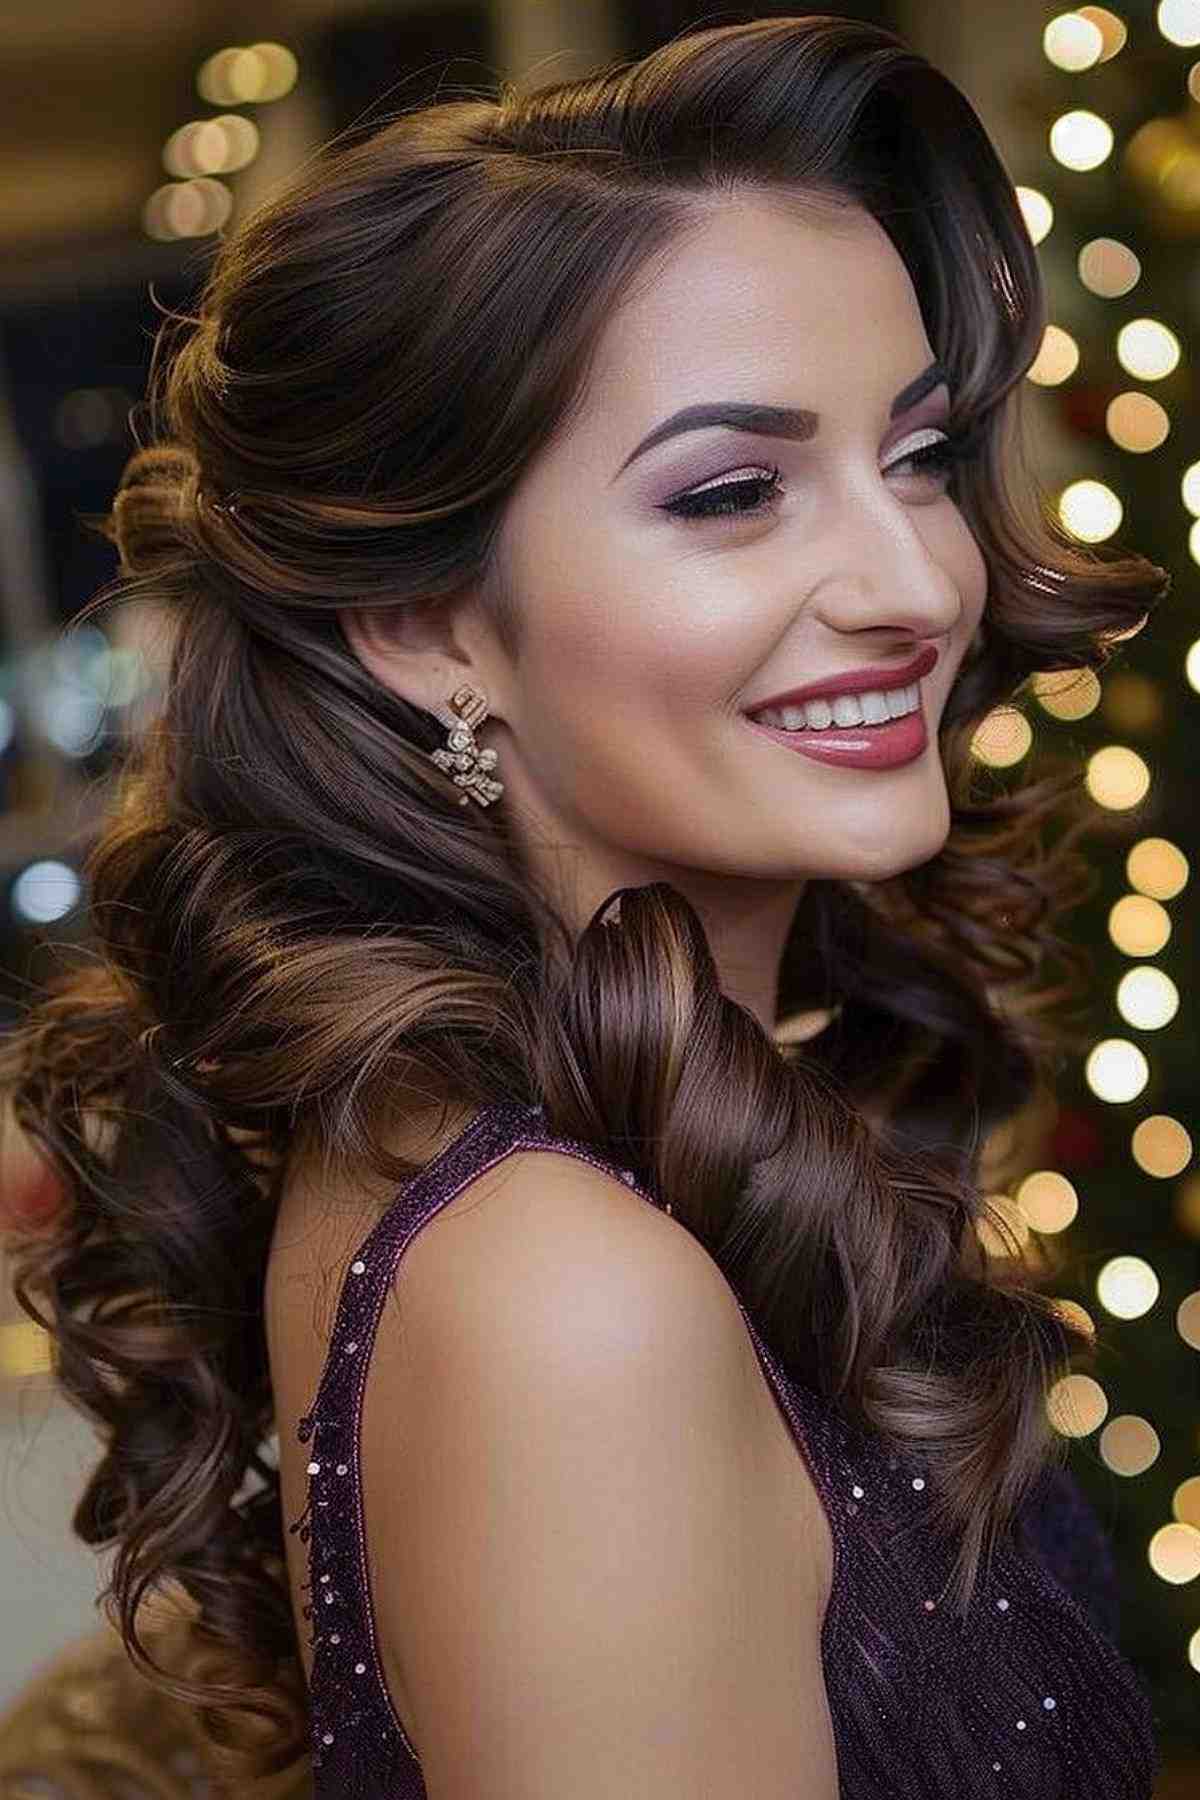 Elegant Hollywood waves for a vintage-inspired timeless gala hairstyle.